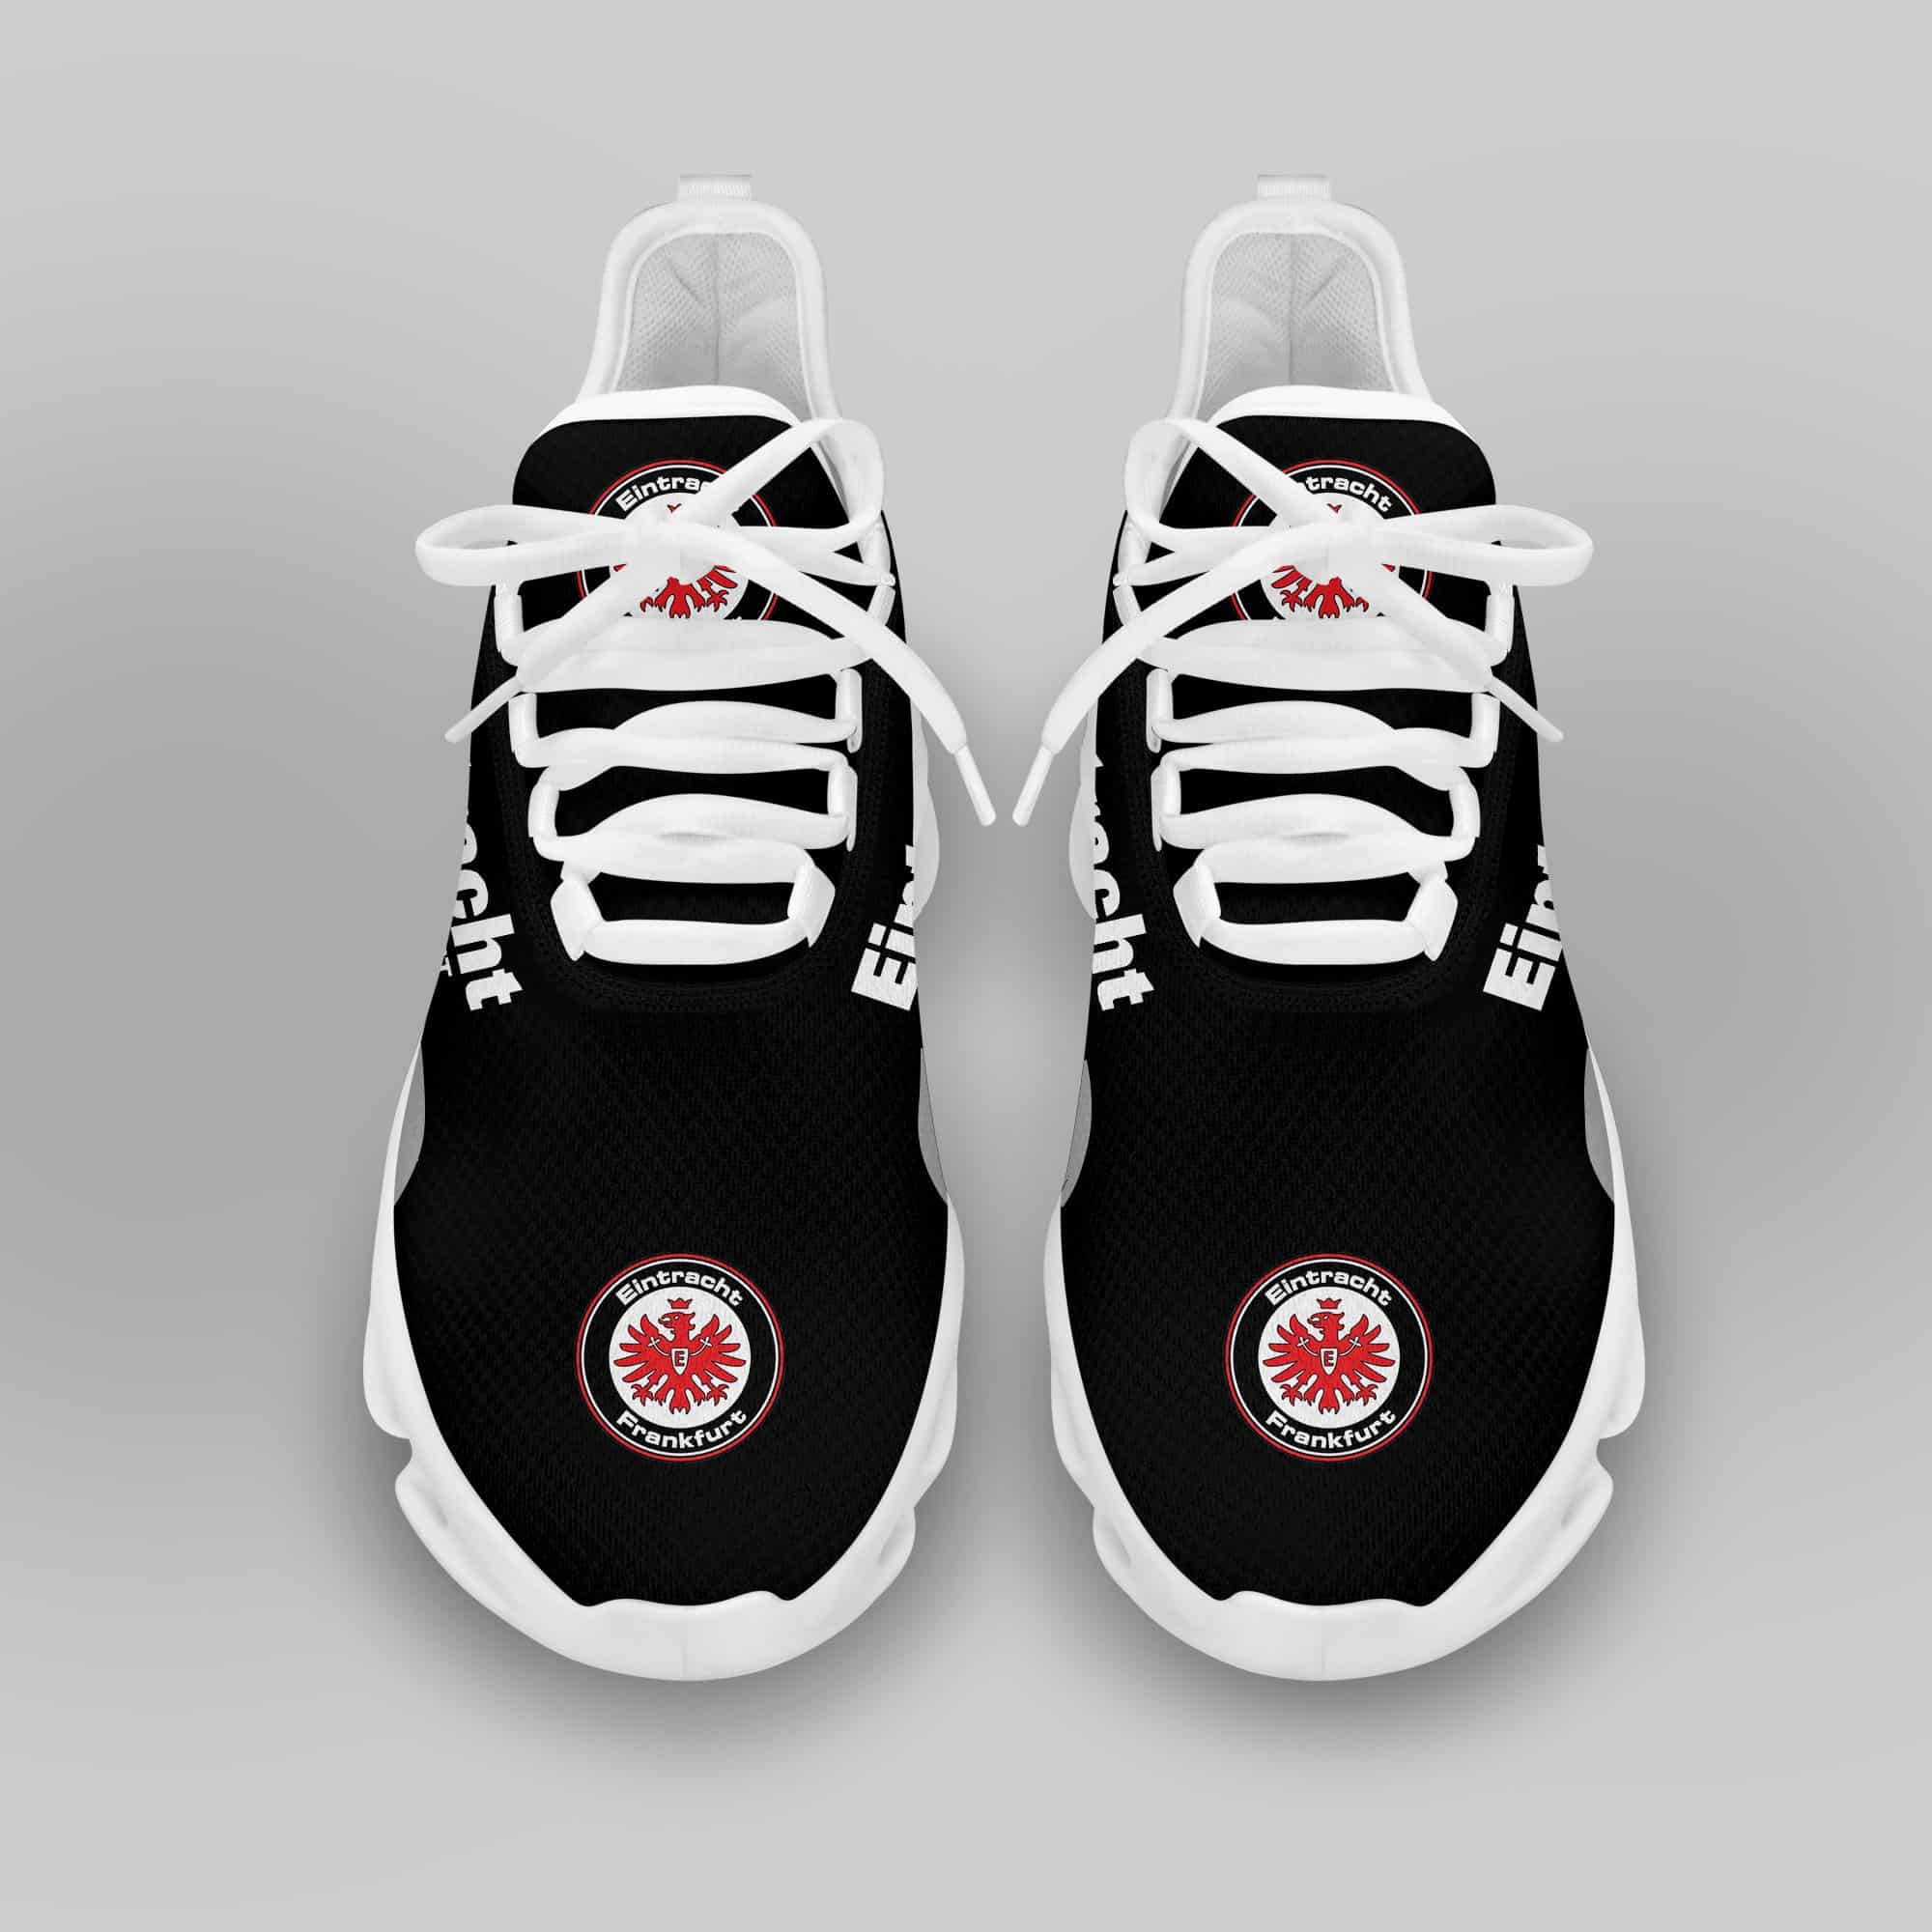 Eintracht Frankfurt Running Shoes Max Soul Shoes Sneakers Ver 30 3